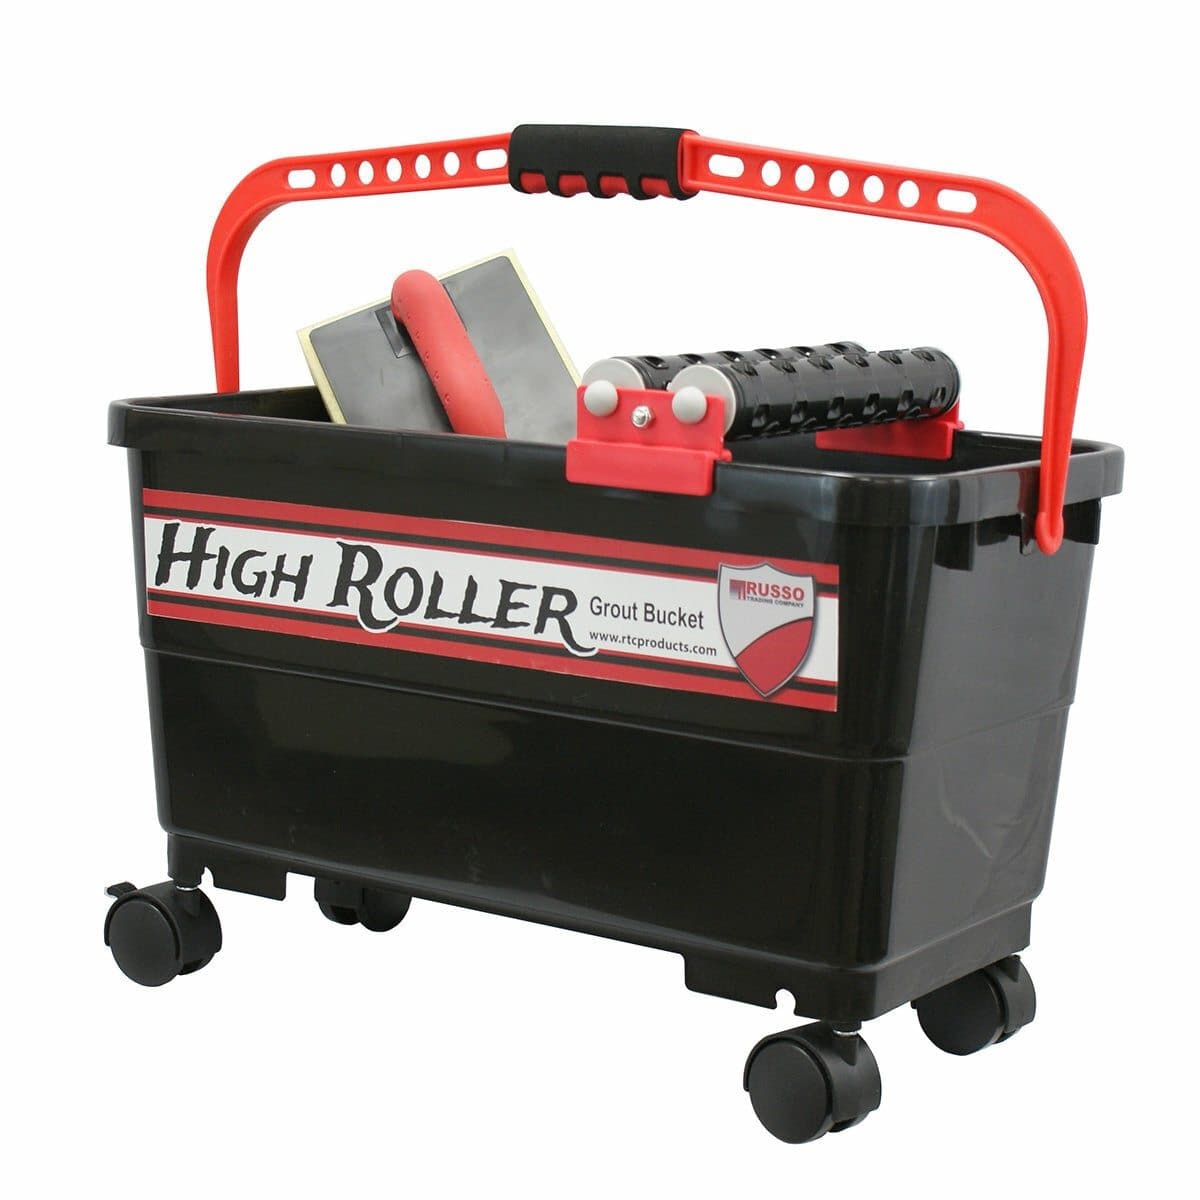 RTC High Roller Grout Bucket - RTC Products